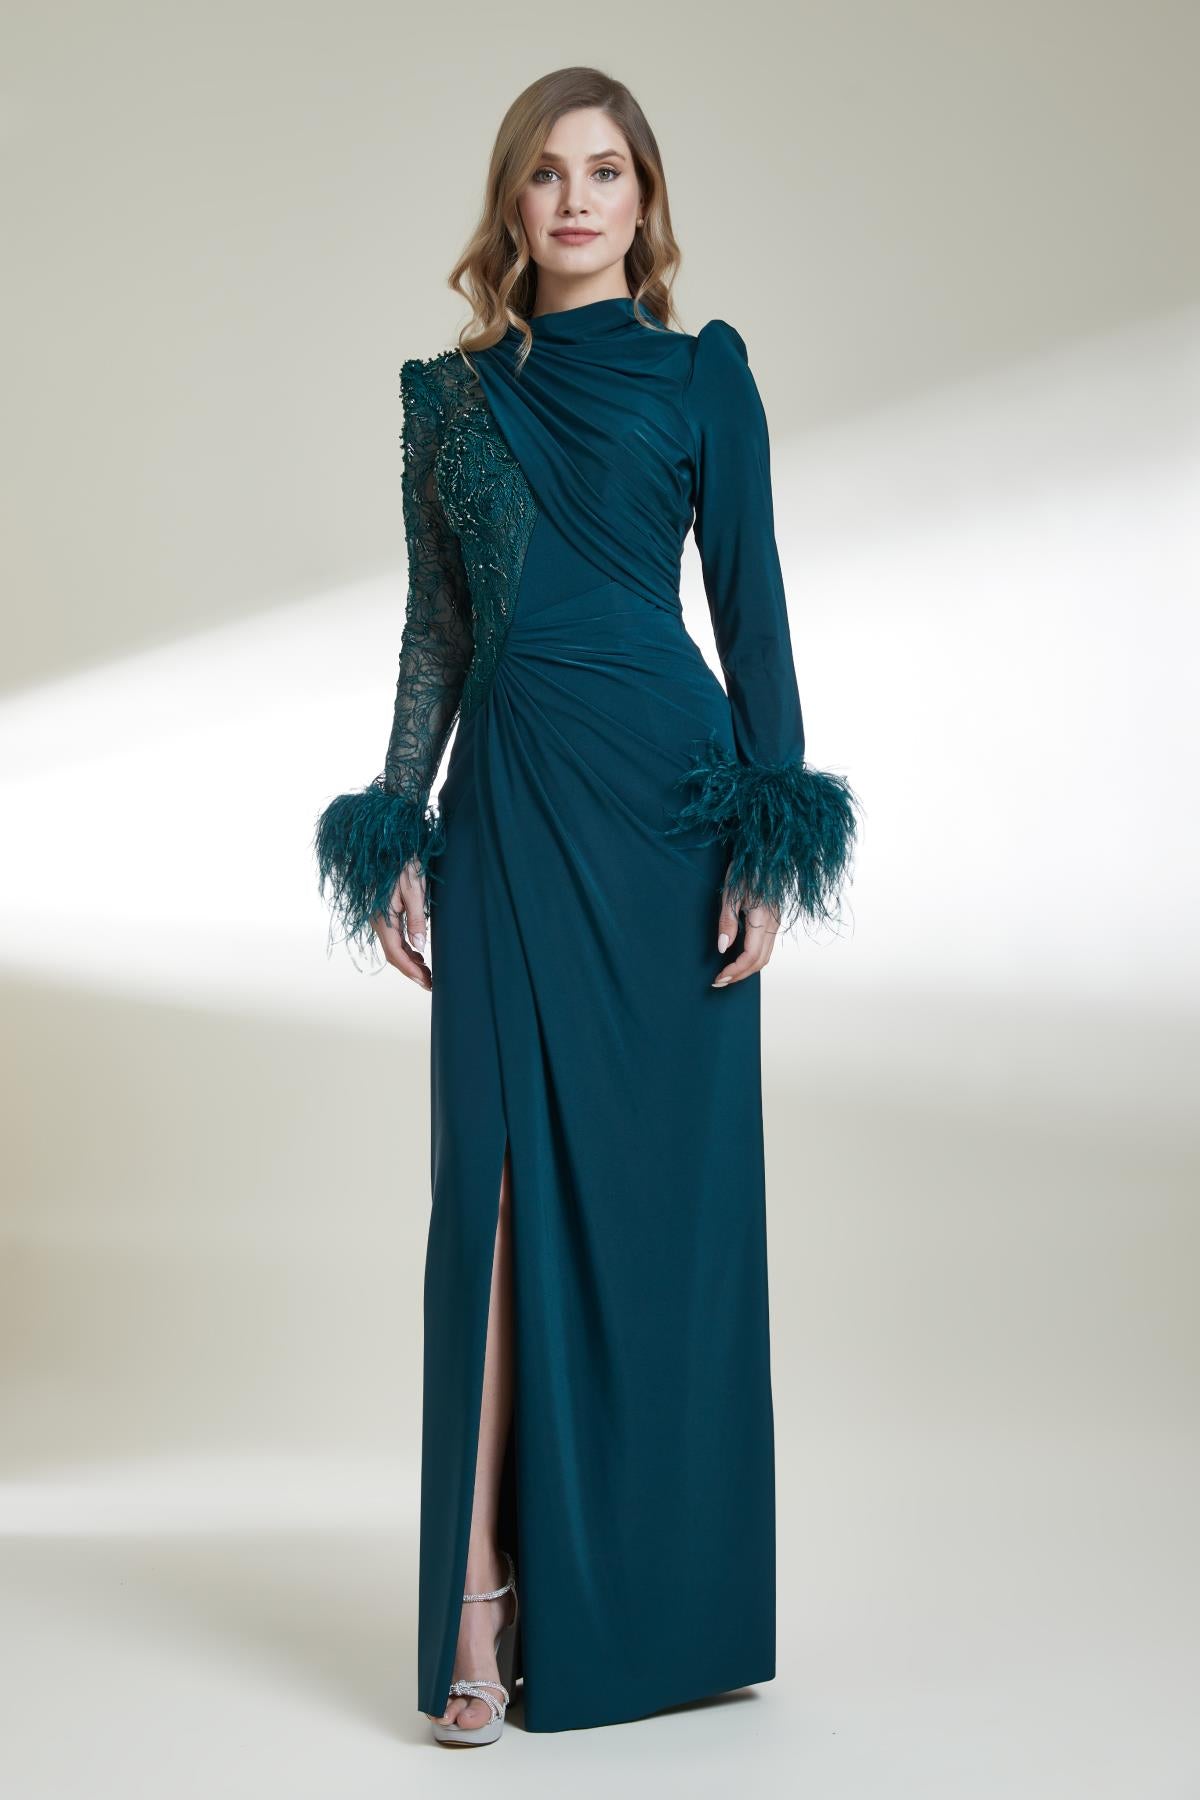 Lace Draped Long Evening Dress with Back Window